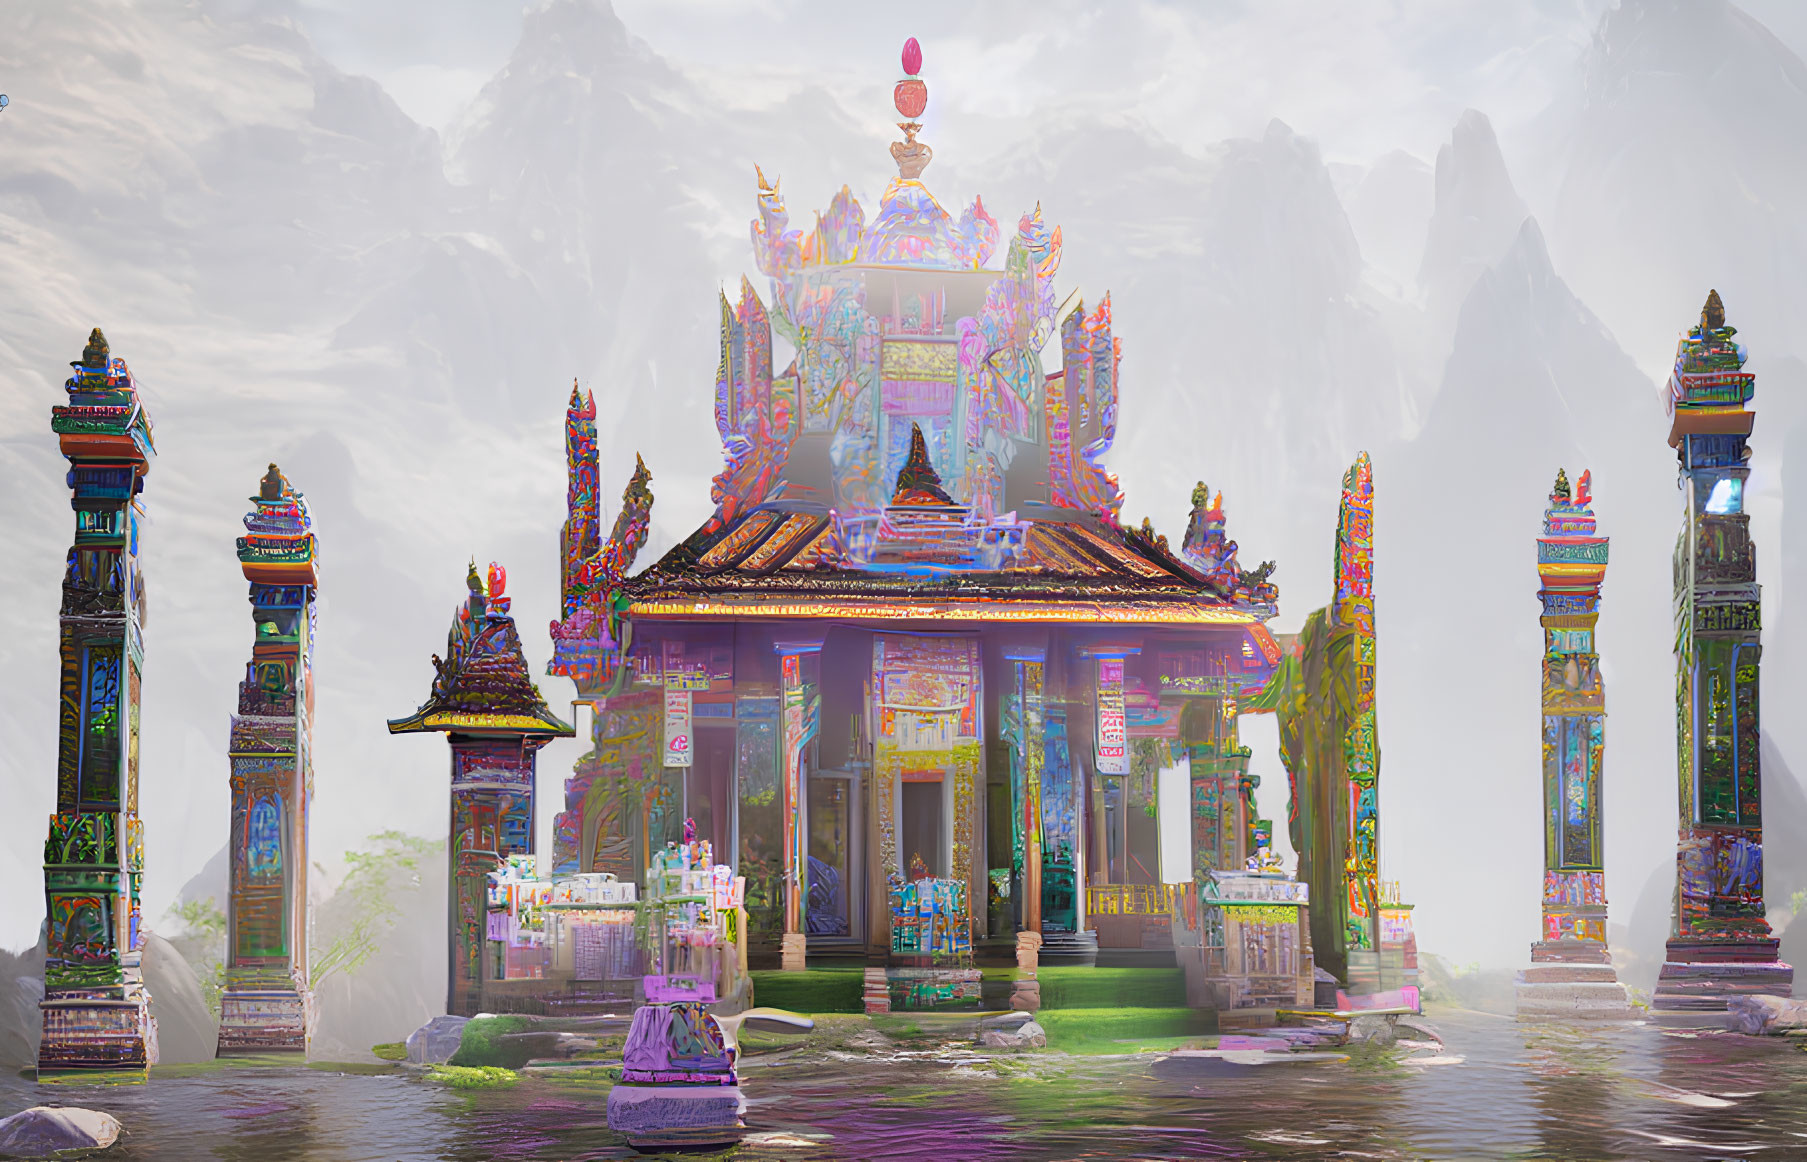 Colorful Ornate Temple Surrounded by Water and Misty Mountains